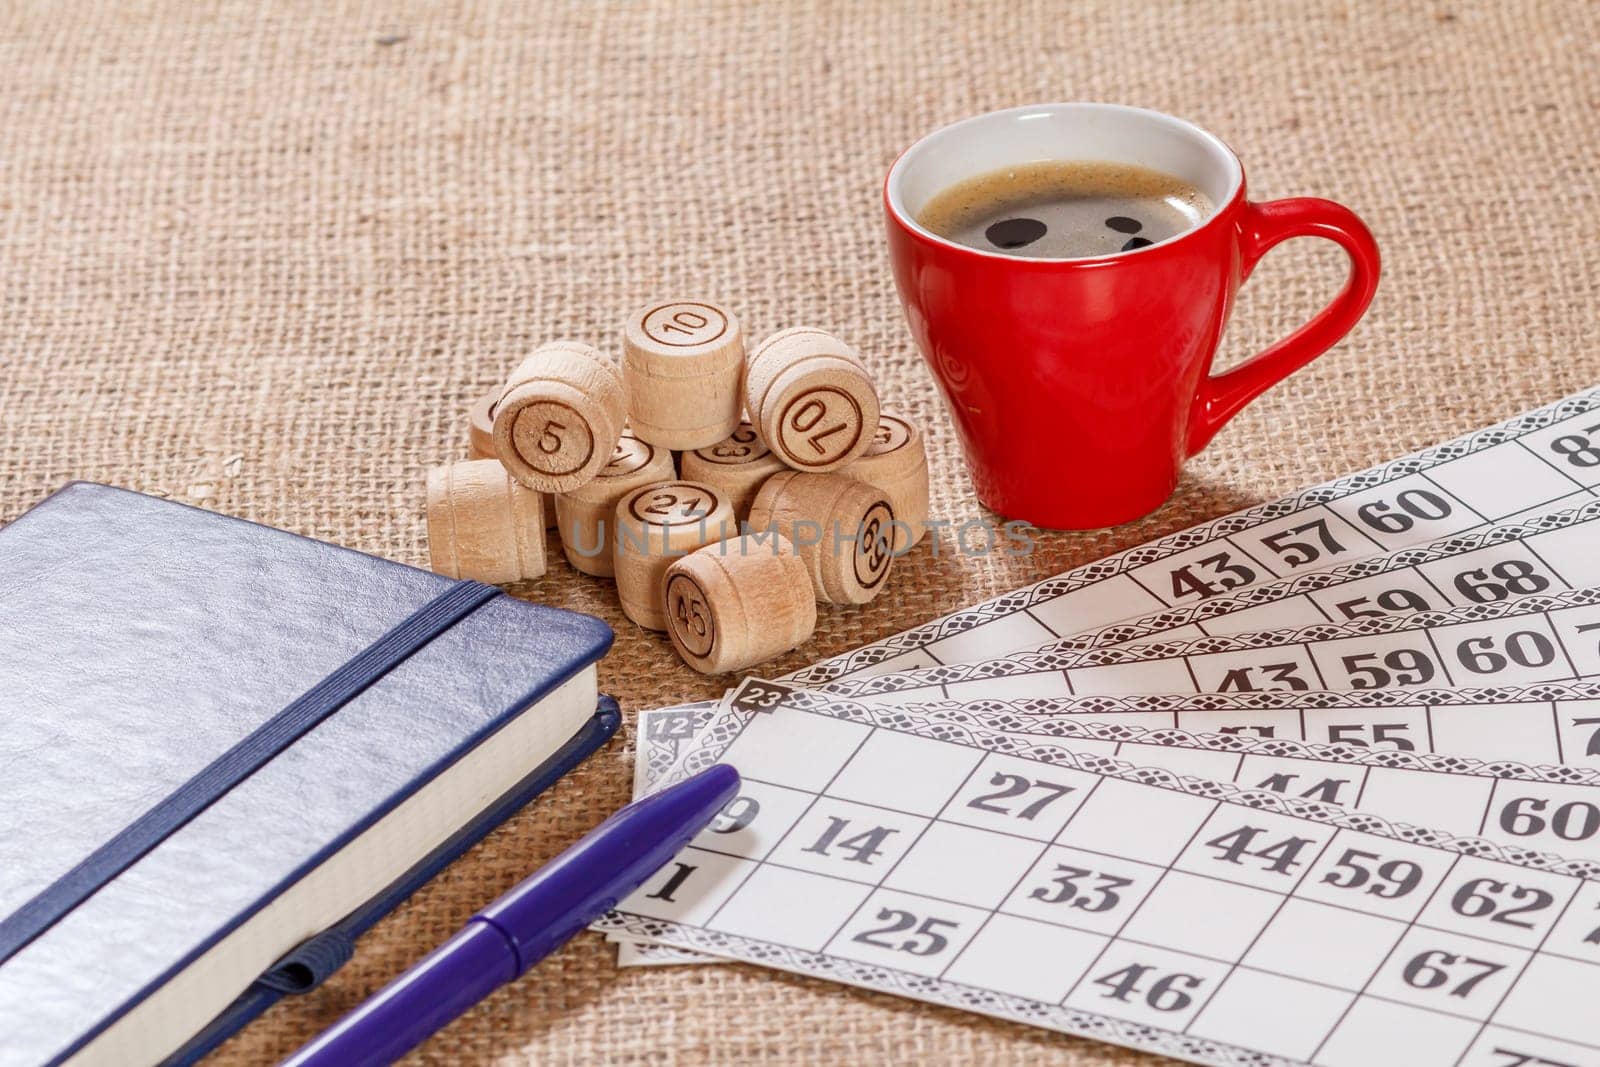 Board game lotto on sackcloth. Wooden lotto barrels and game cards with a cup of coffee and a notebook. by mvg6894